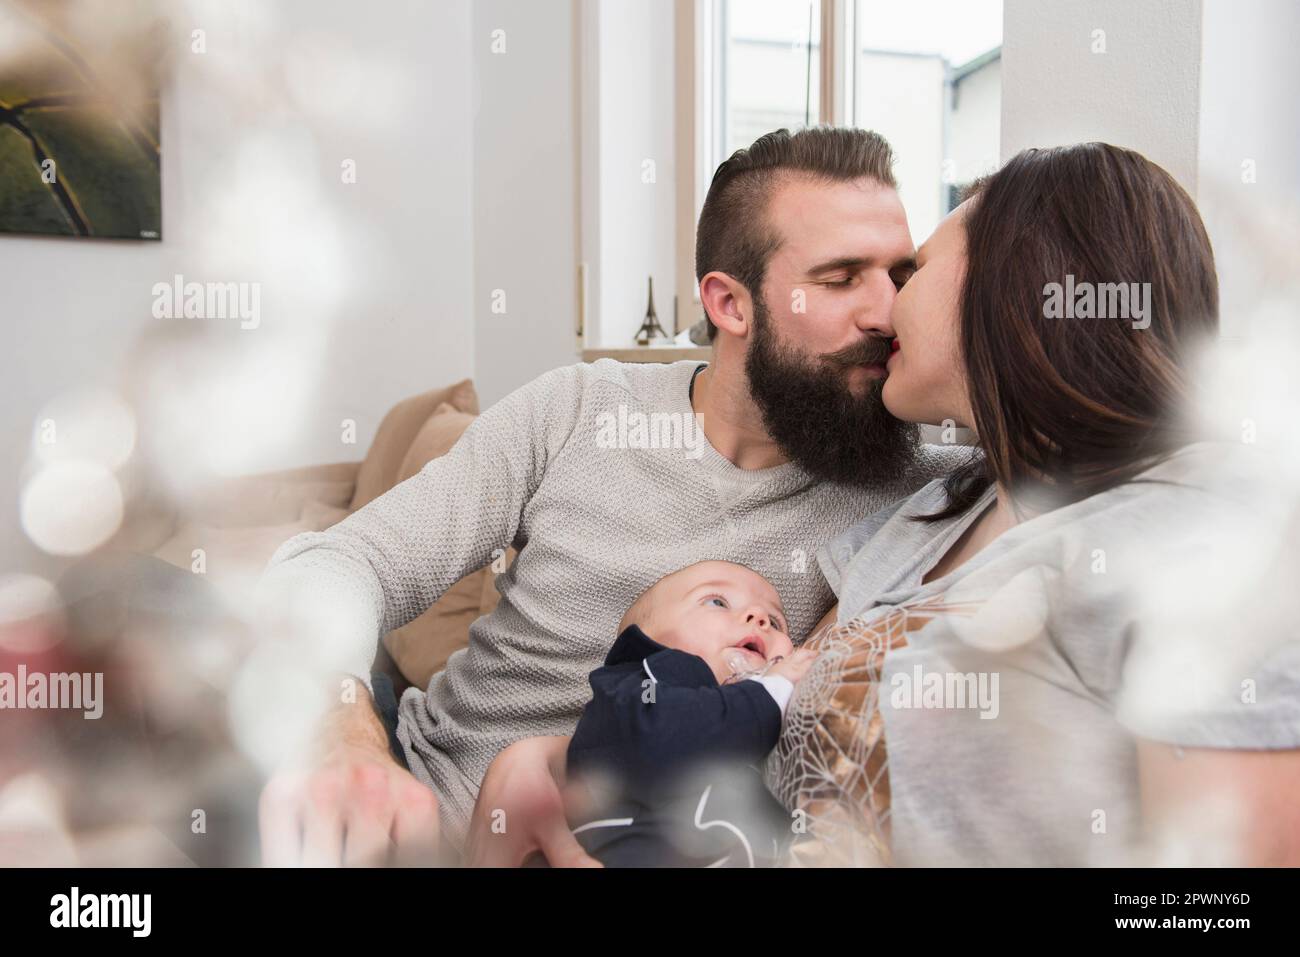 Couples kissing with baby on sofa Stock Photo